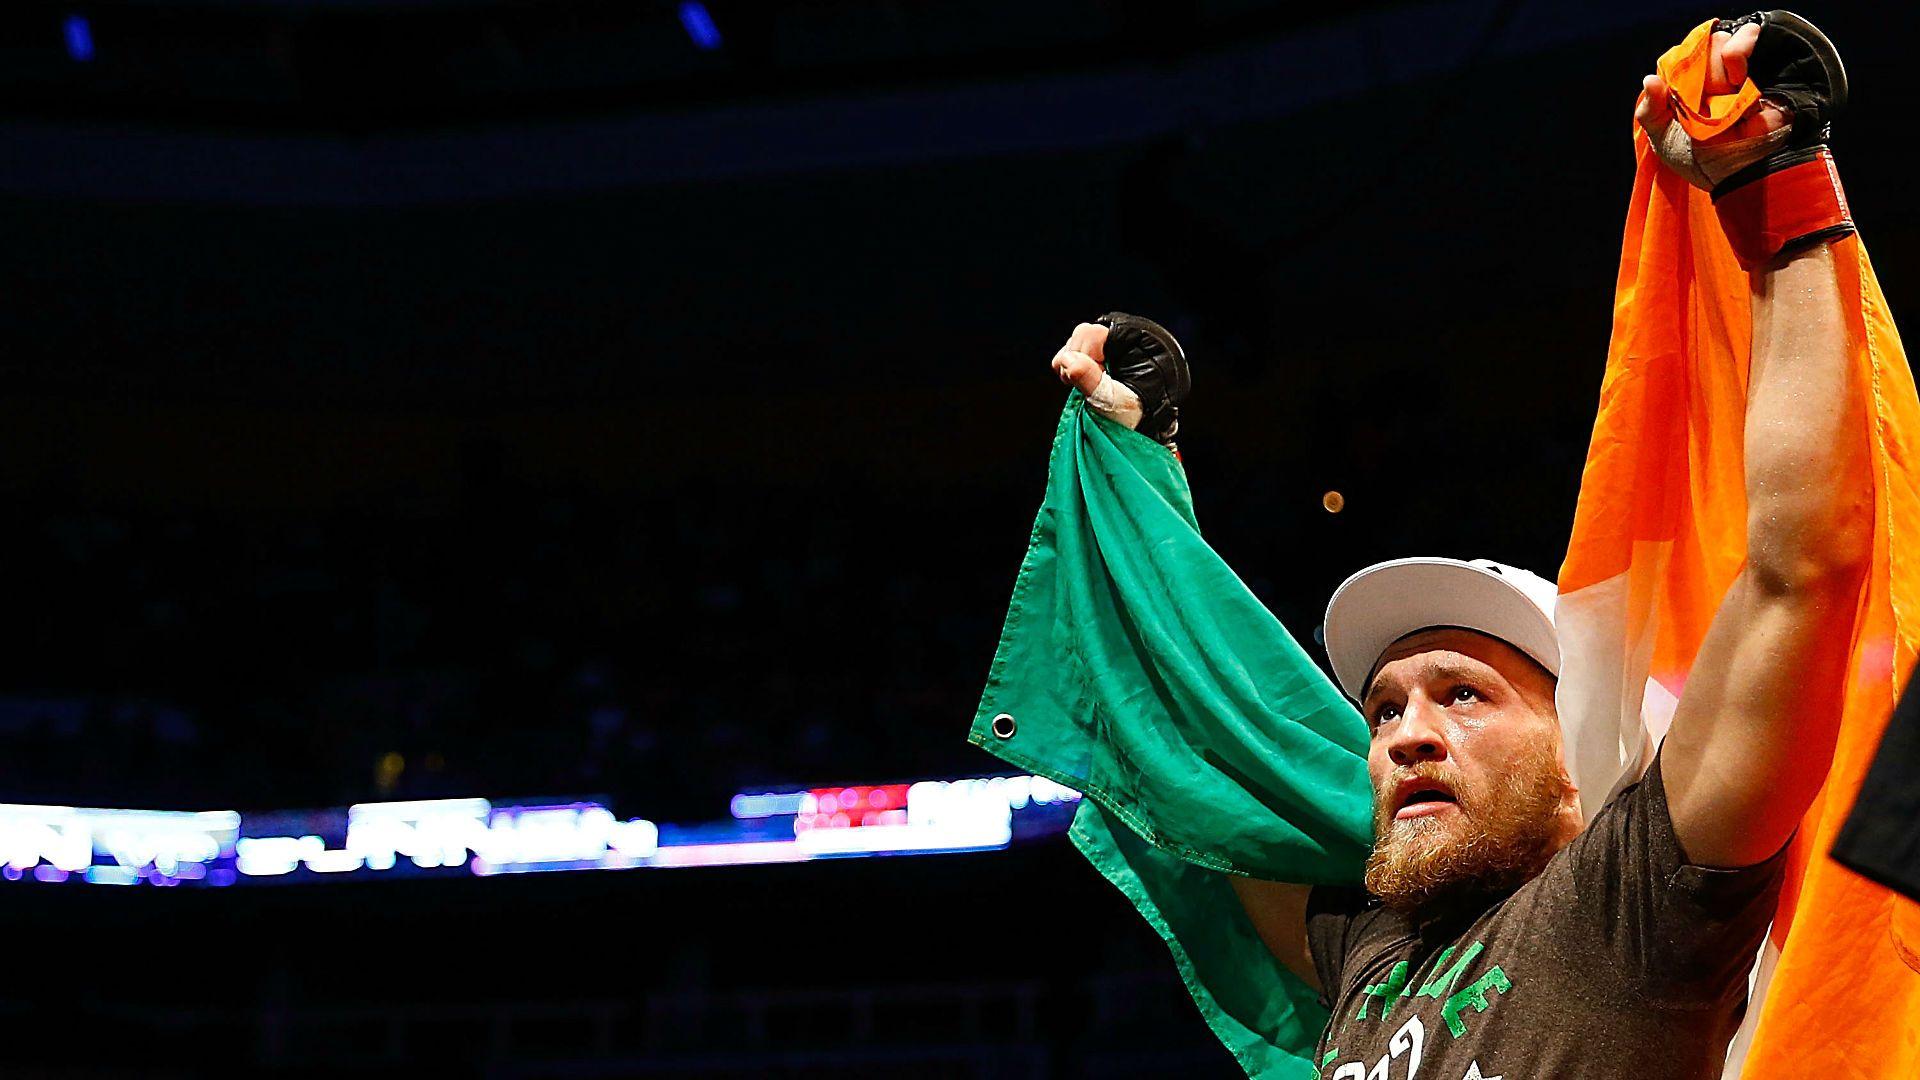 Now's the time for Conor McGregor to relinquish UFC lightweight